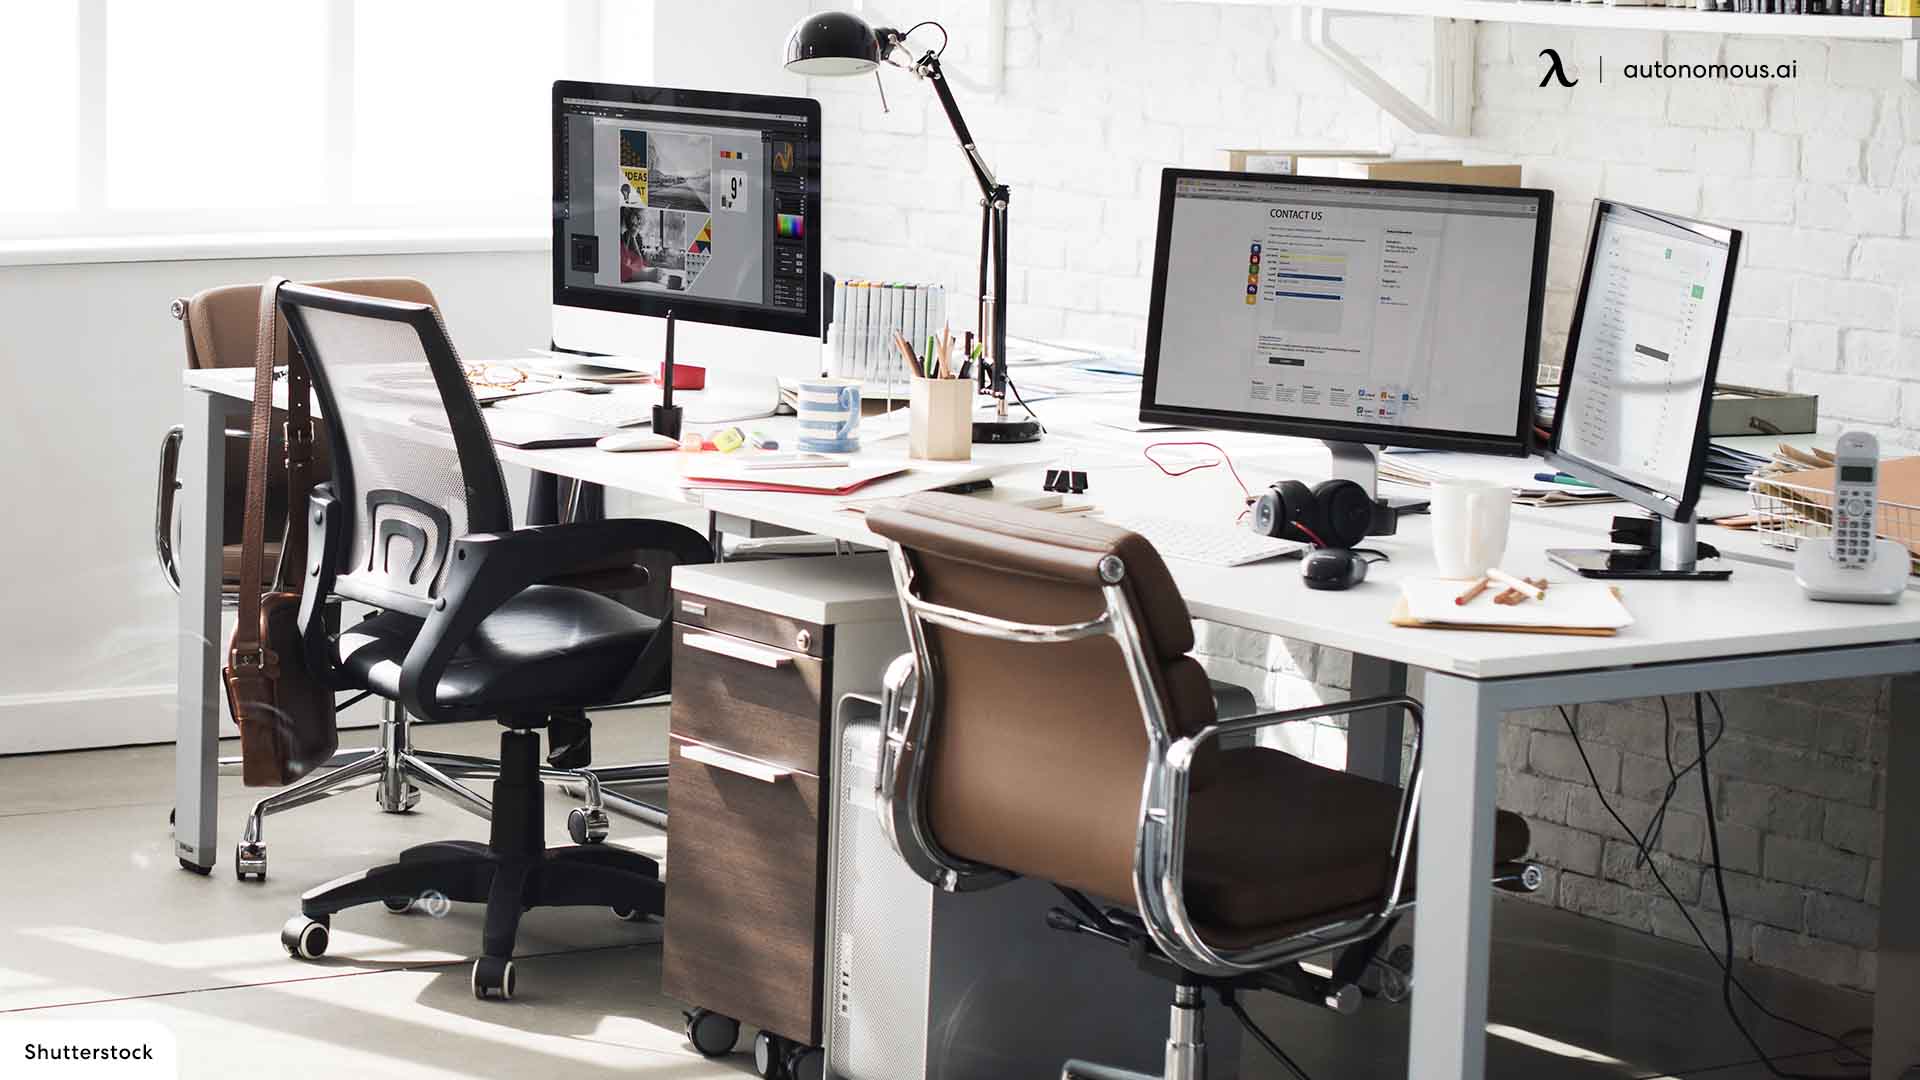 Common Types of Office Equipment in All Workstations